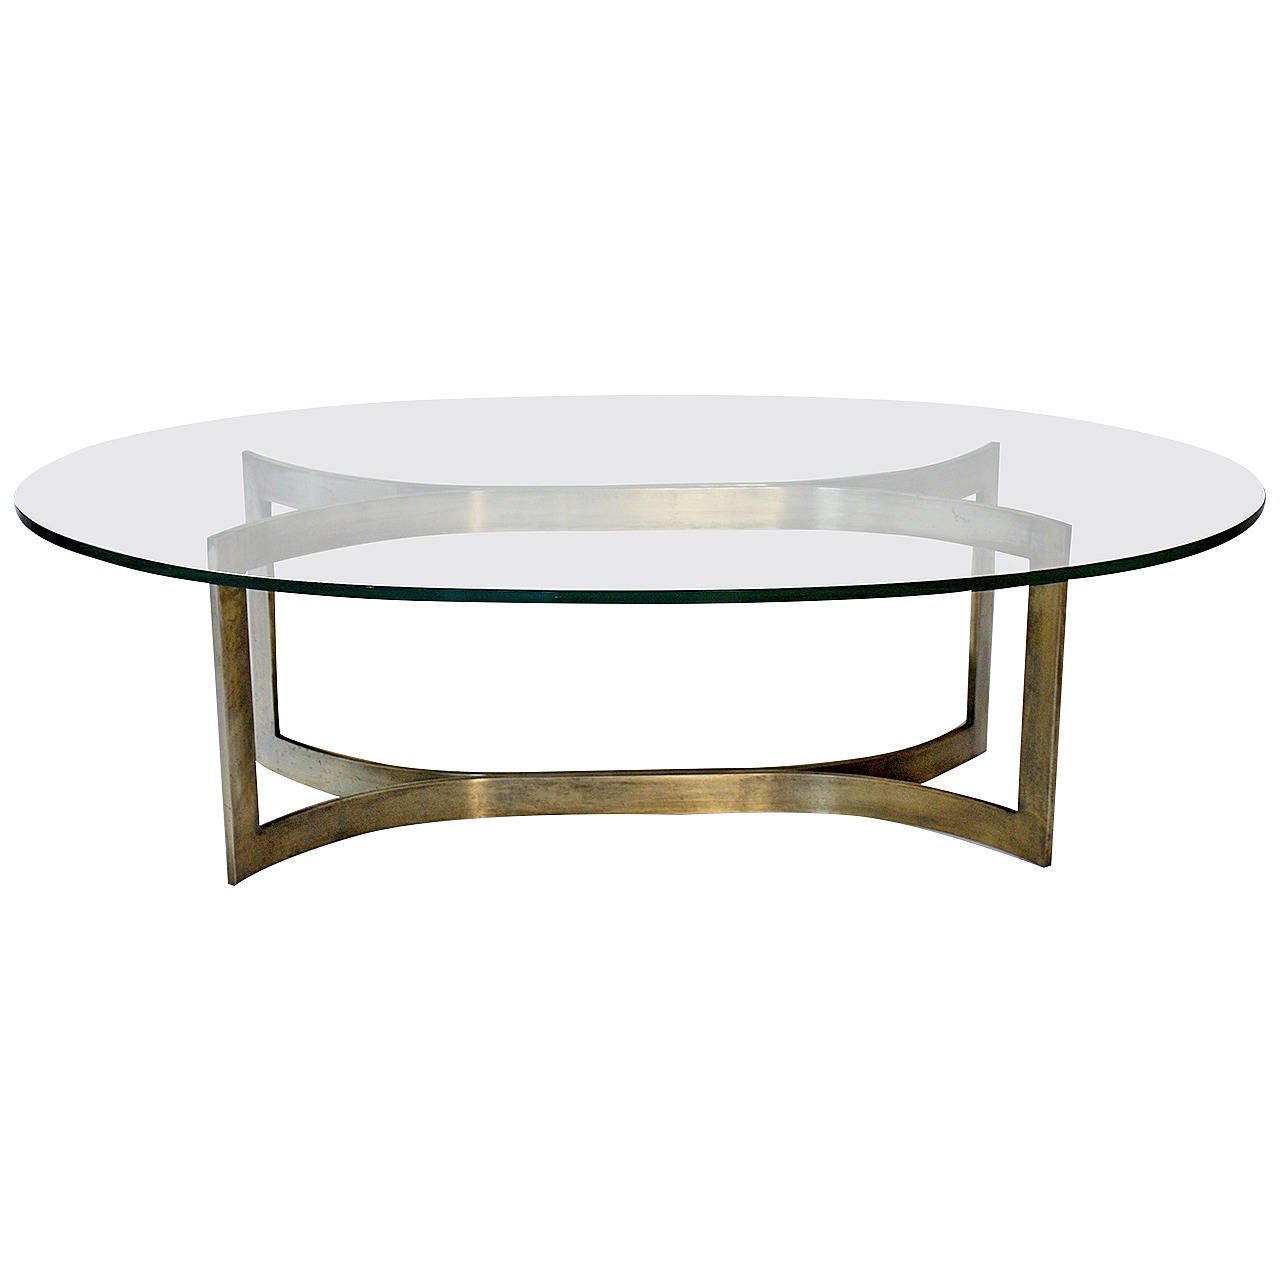 Well Liked Glass And Gold Oval Coffee Tables With Regard To Baker Bronze And Glass Oval Cocktail Table At 1stdibs (View 13 of 20)